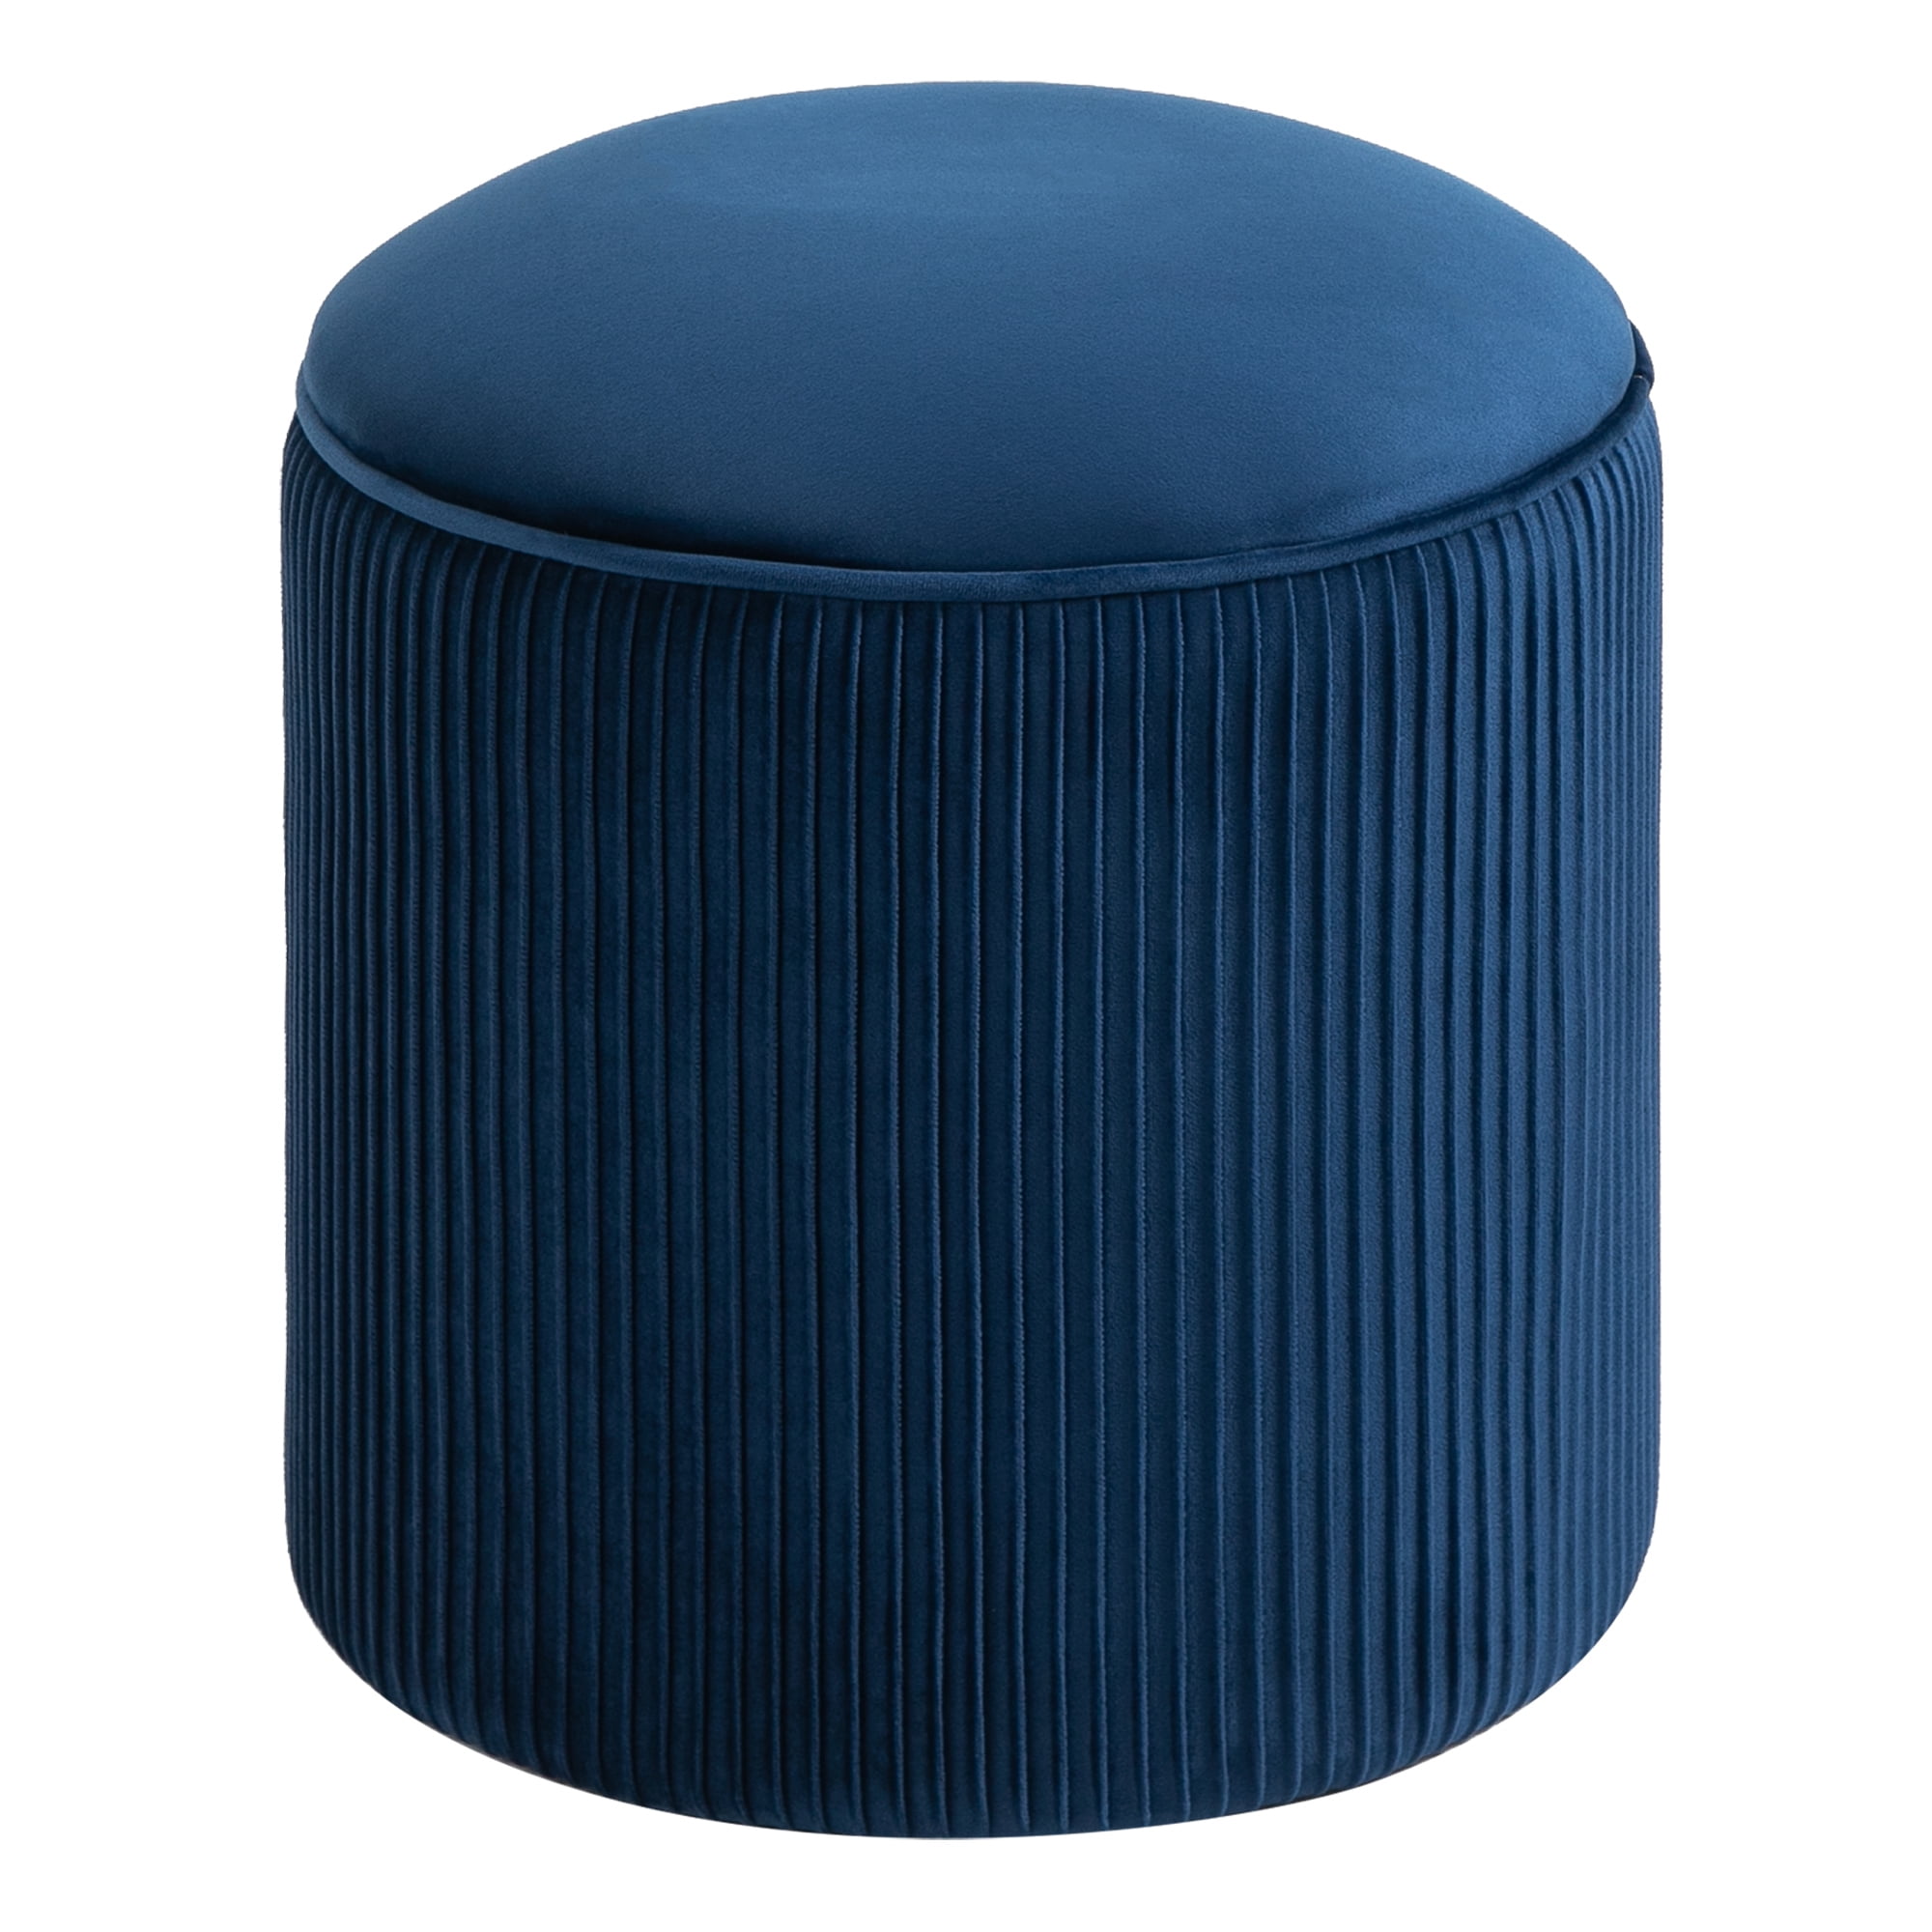 Thick Sponge Padding and Solid Base HOMCOM 15'' Small Padded Ottoman Foot Stool with Wrinkle Fabric Design Blue 